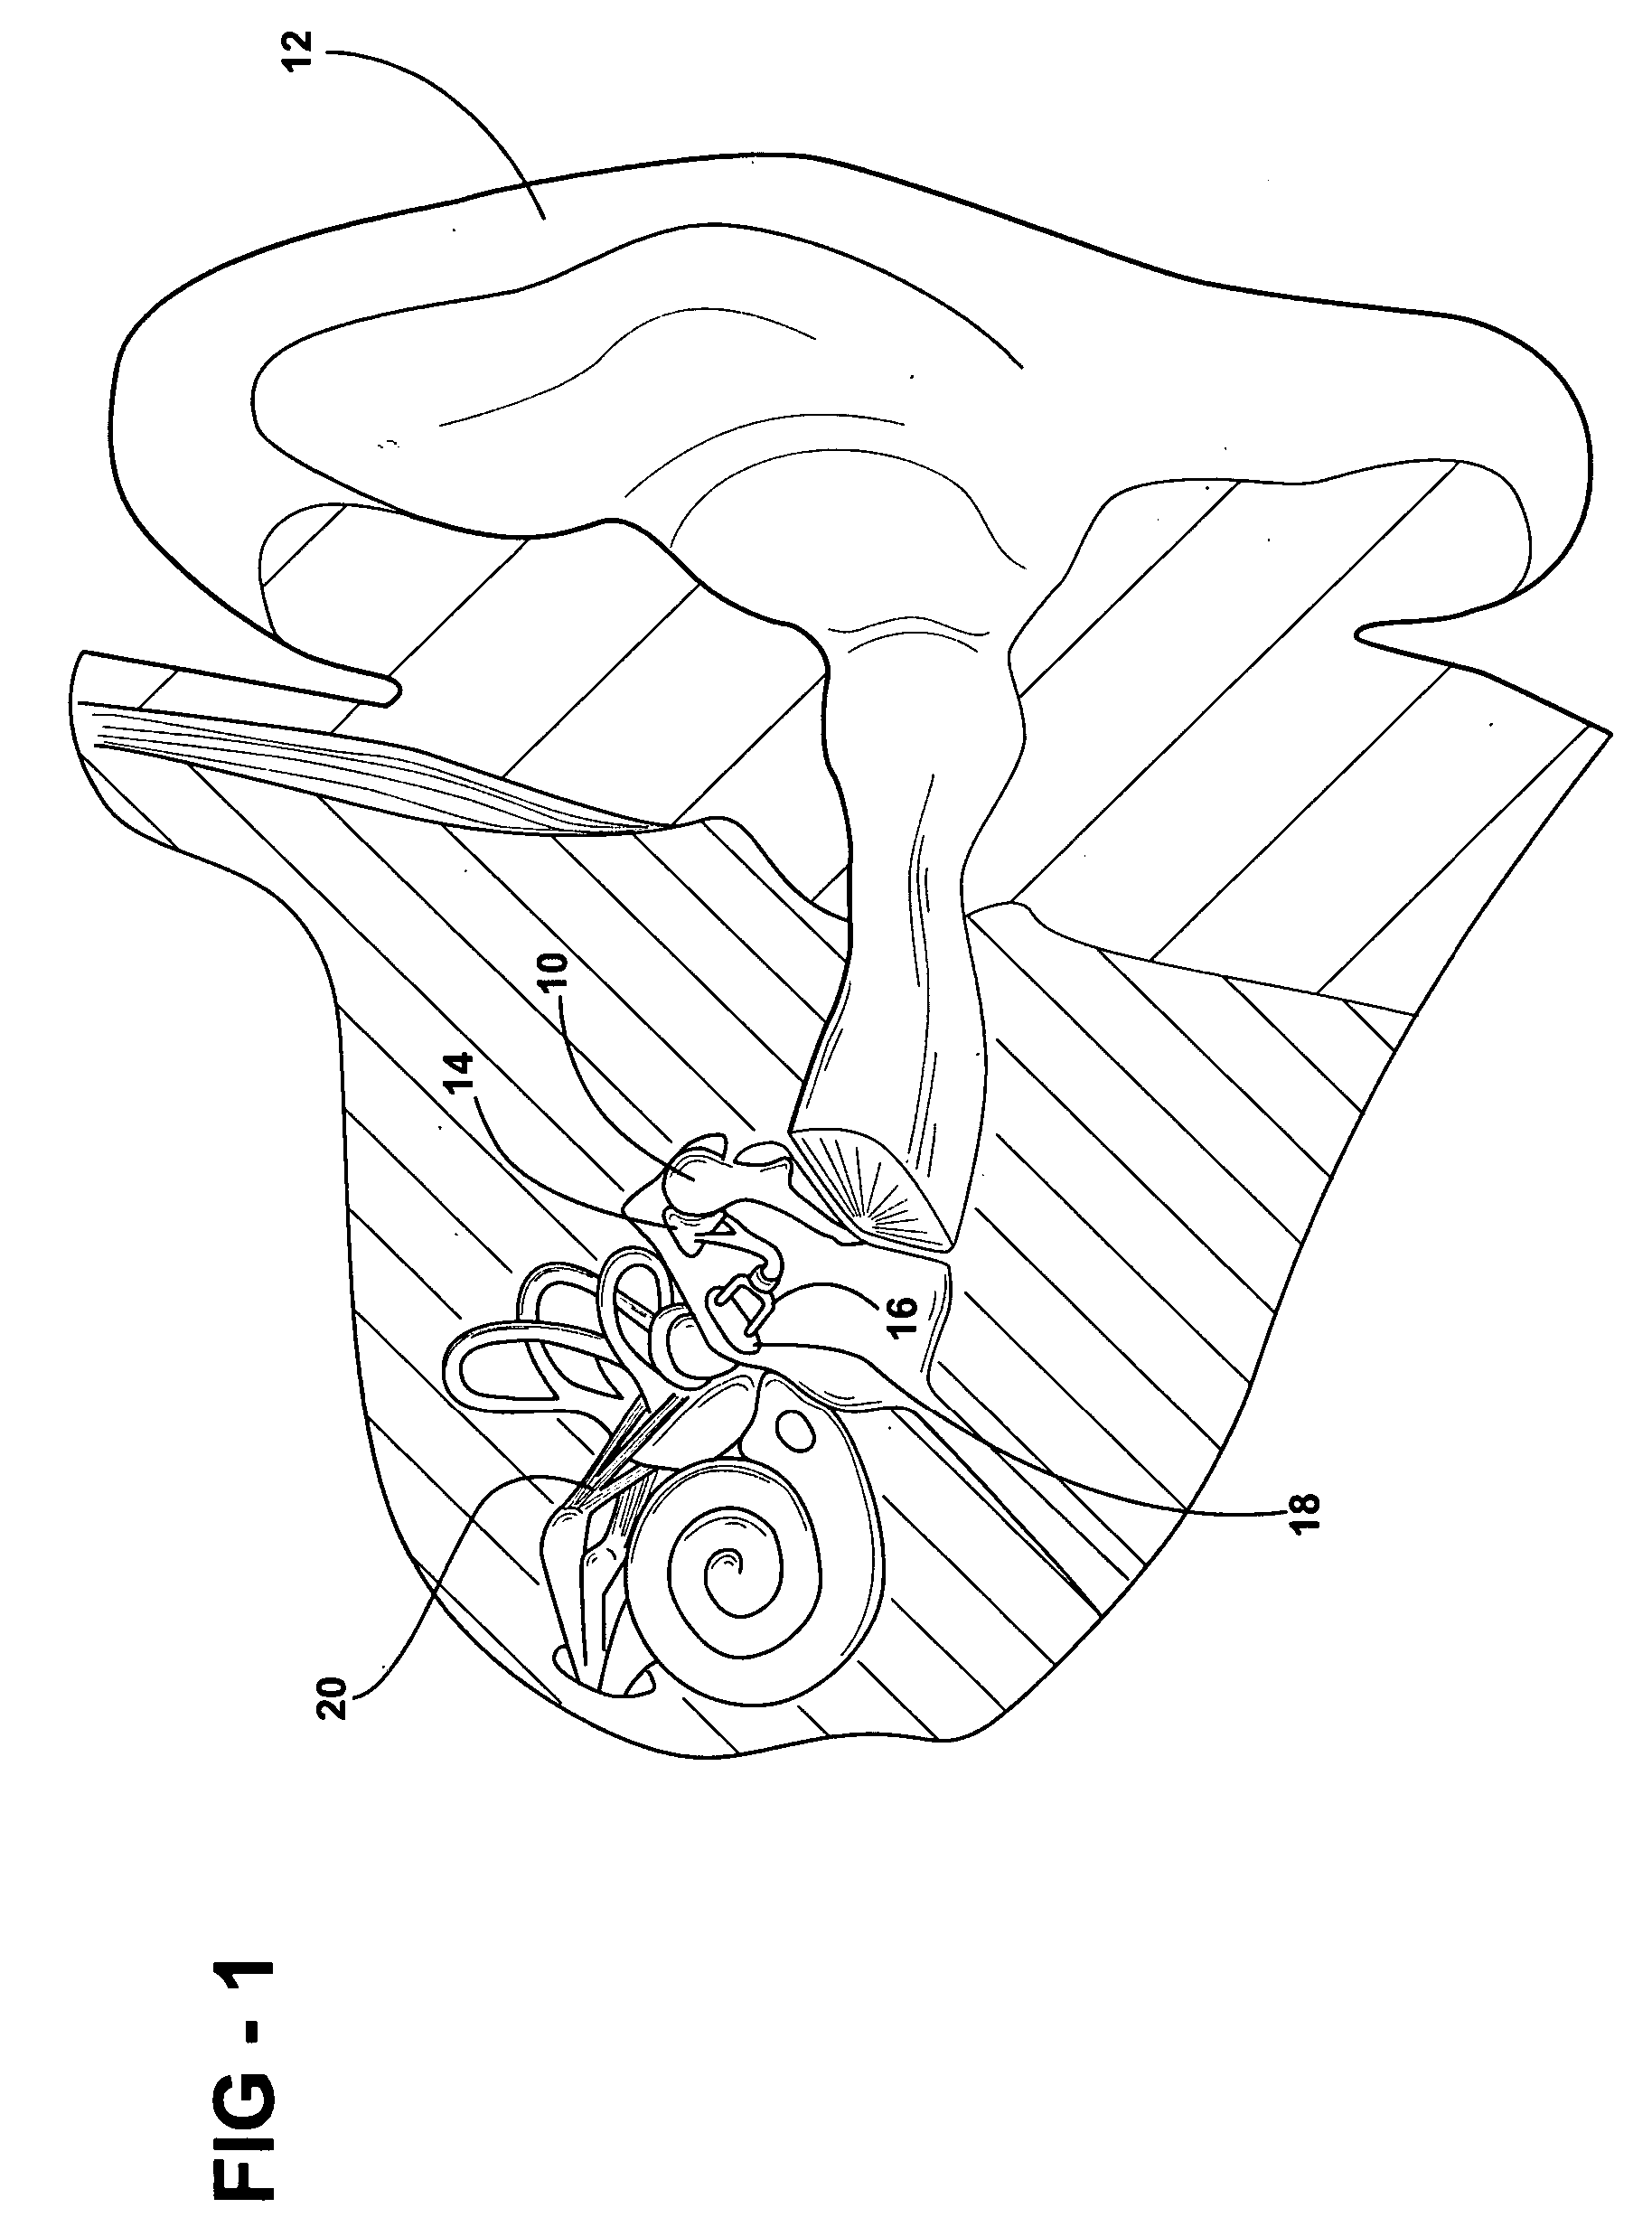 Middle ear reconstruction process and apparatus for performing the process